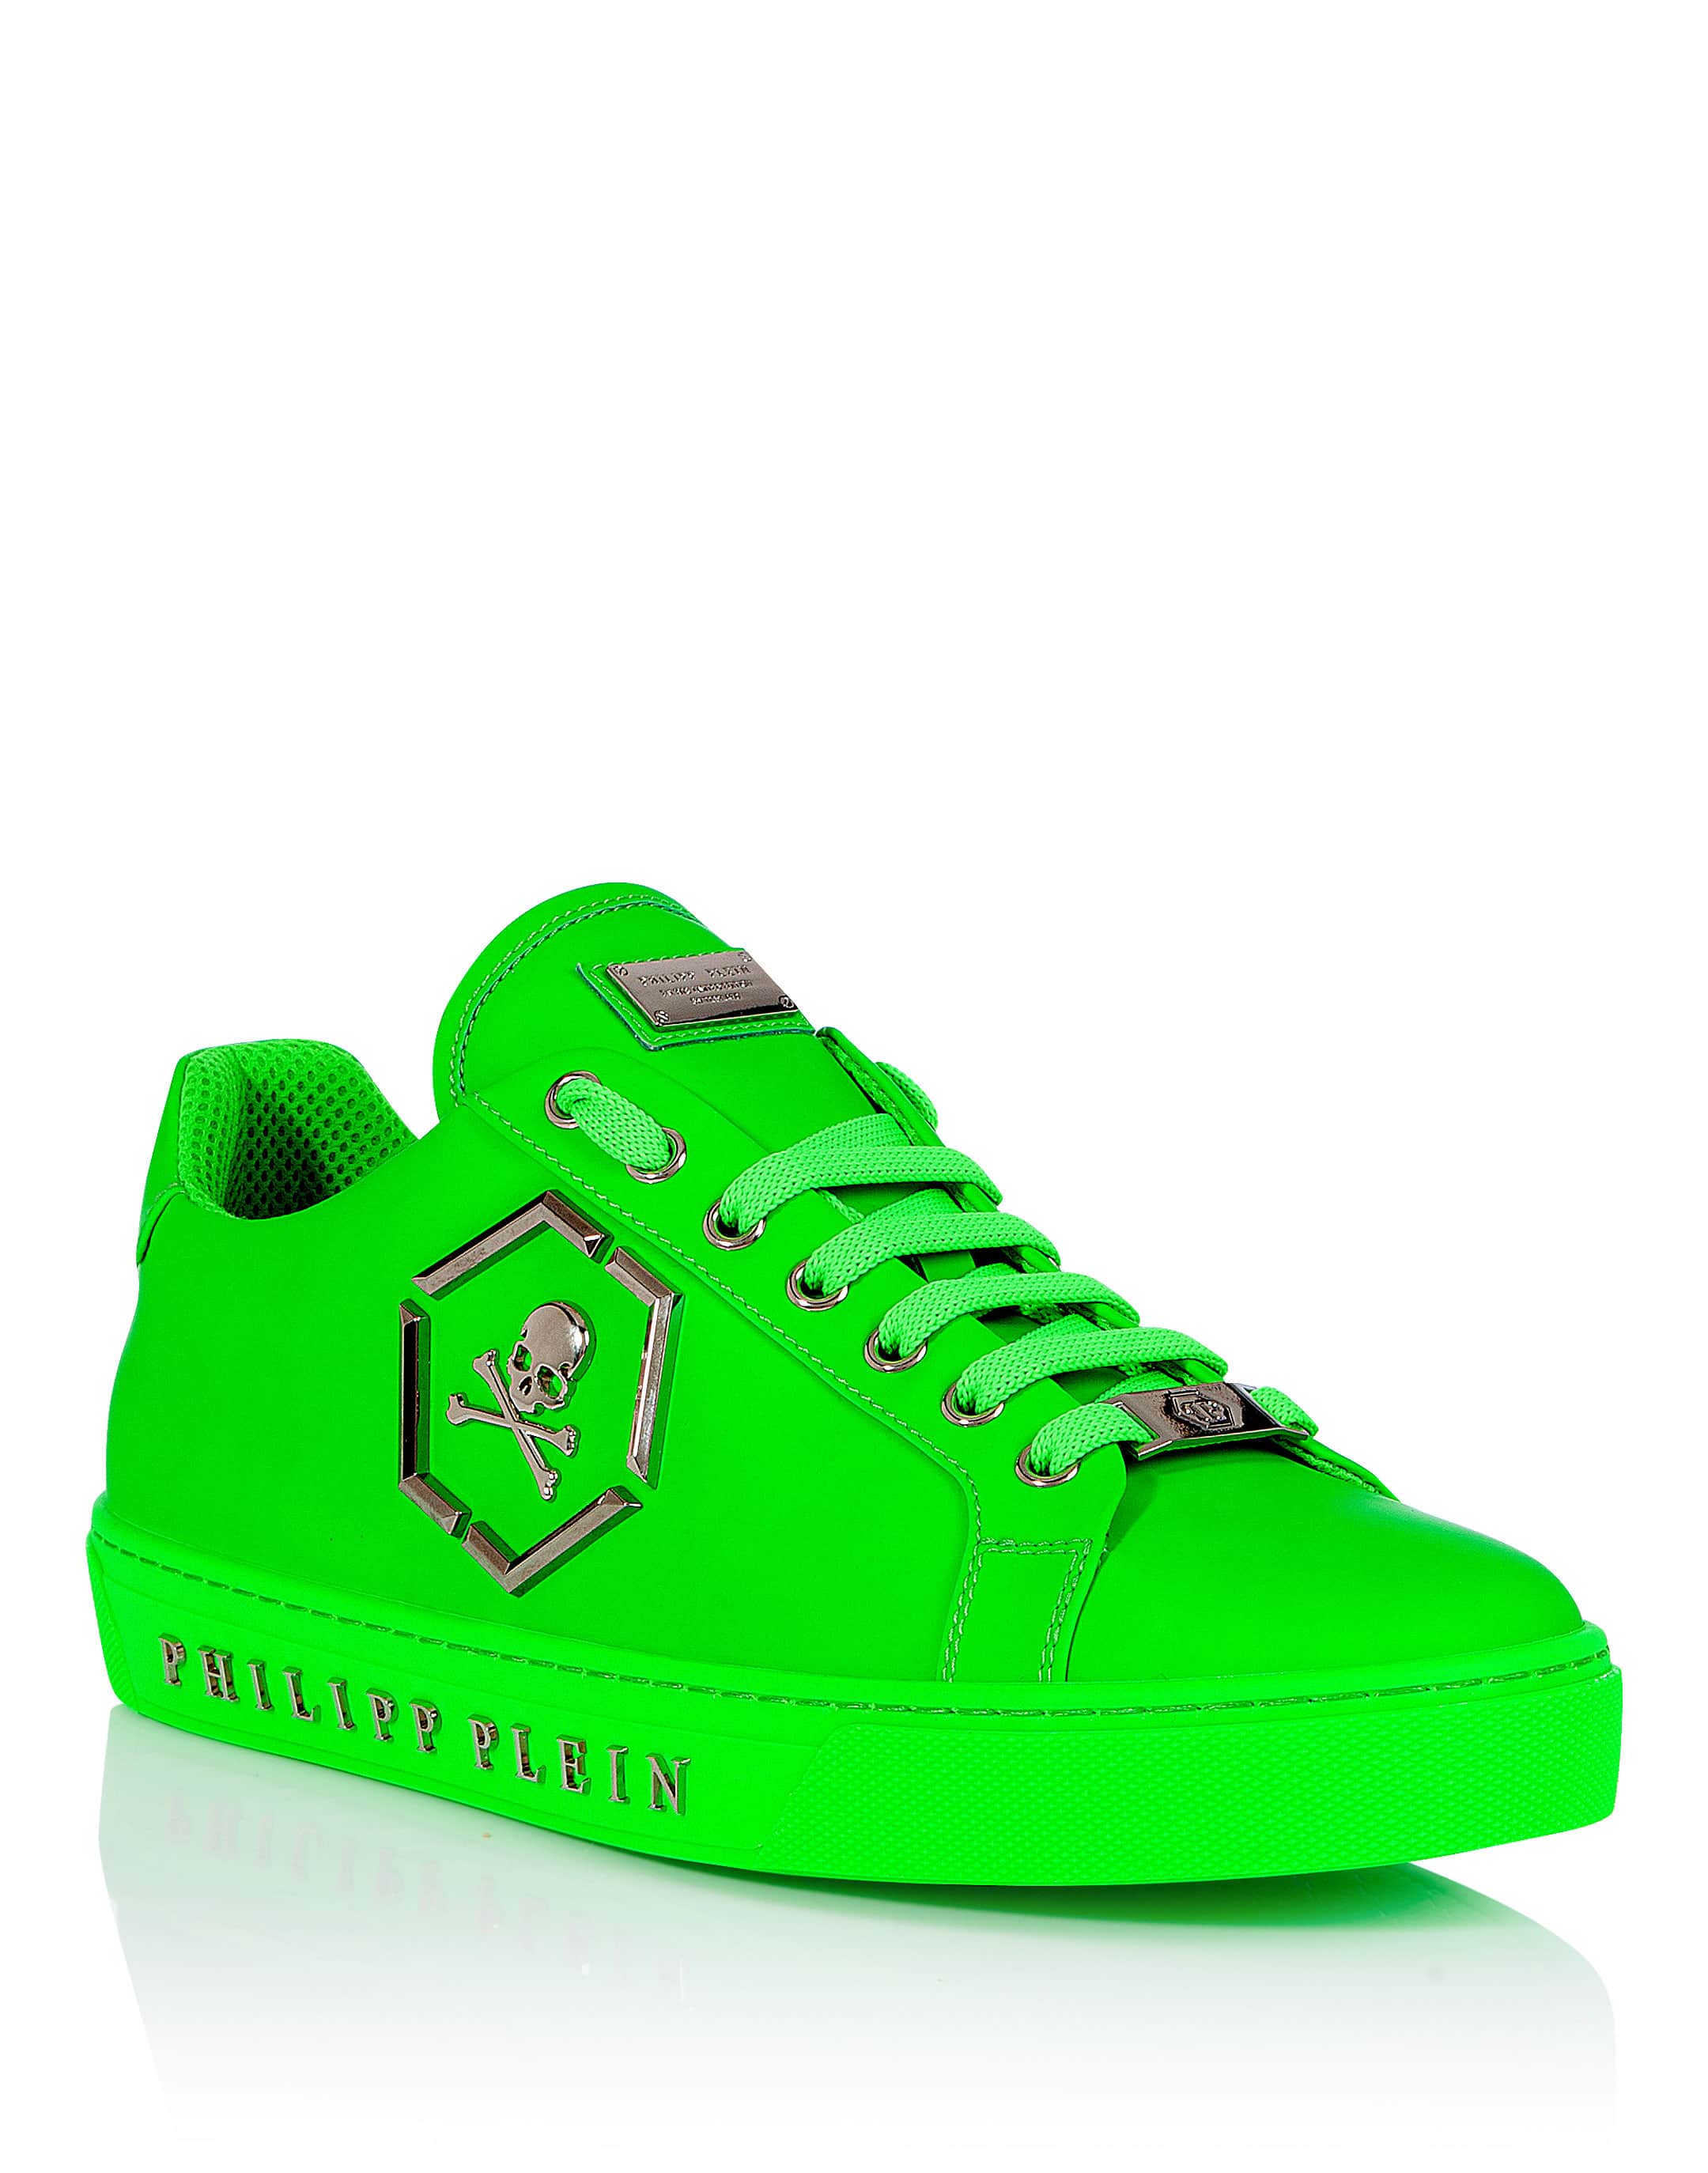 Lo-Top Sneakers fluo version" | Plein Outlet